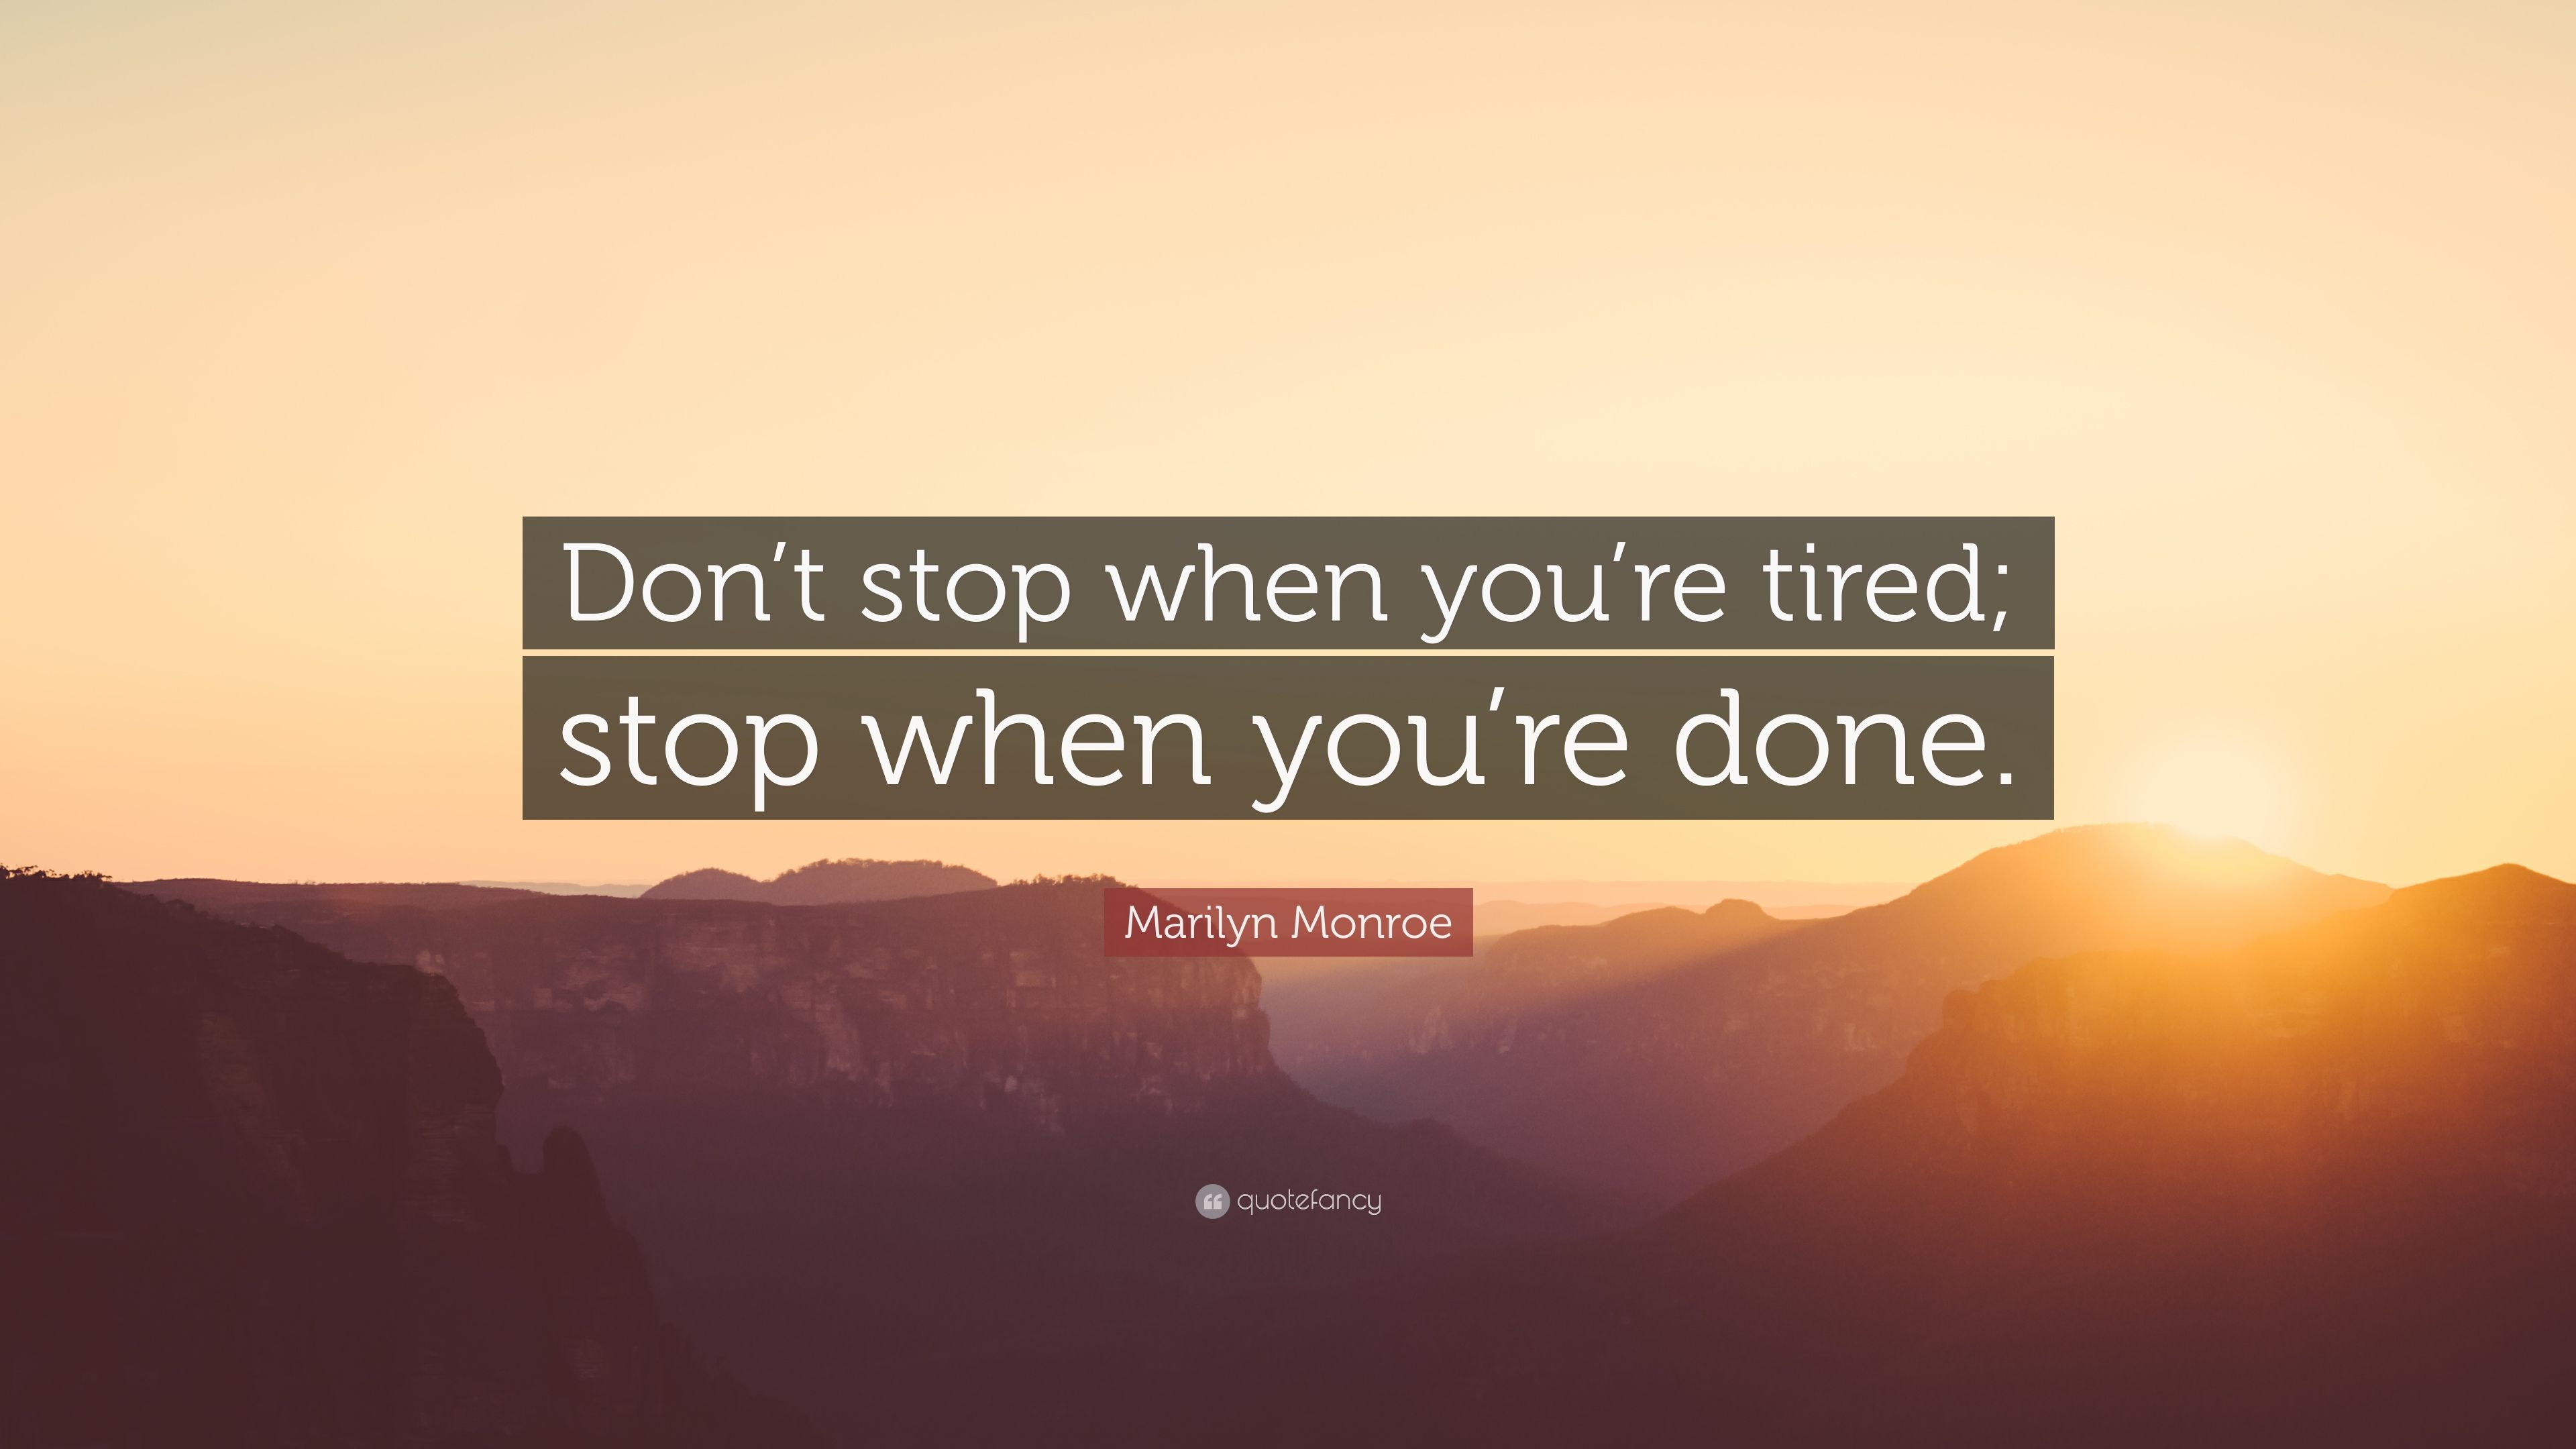 Marilyn Monroe Quote: "Don't stop when you're tired; stop wh...